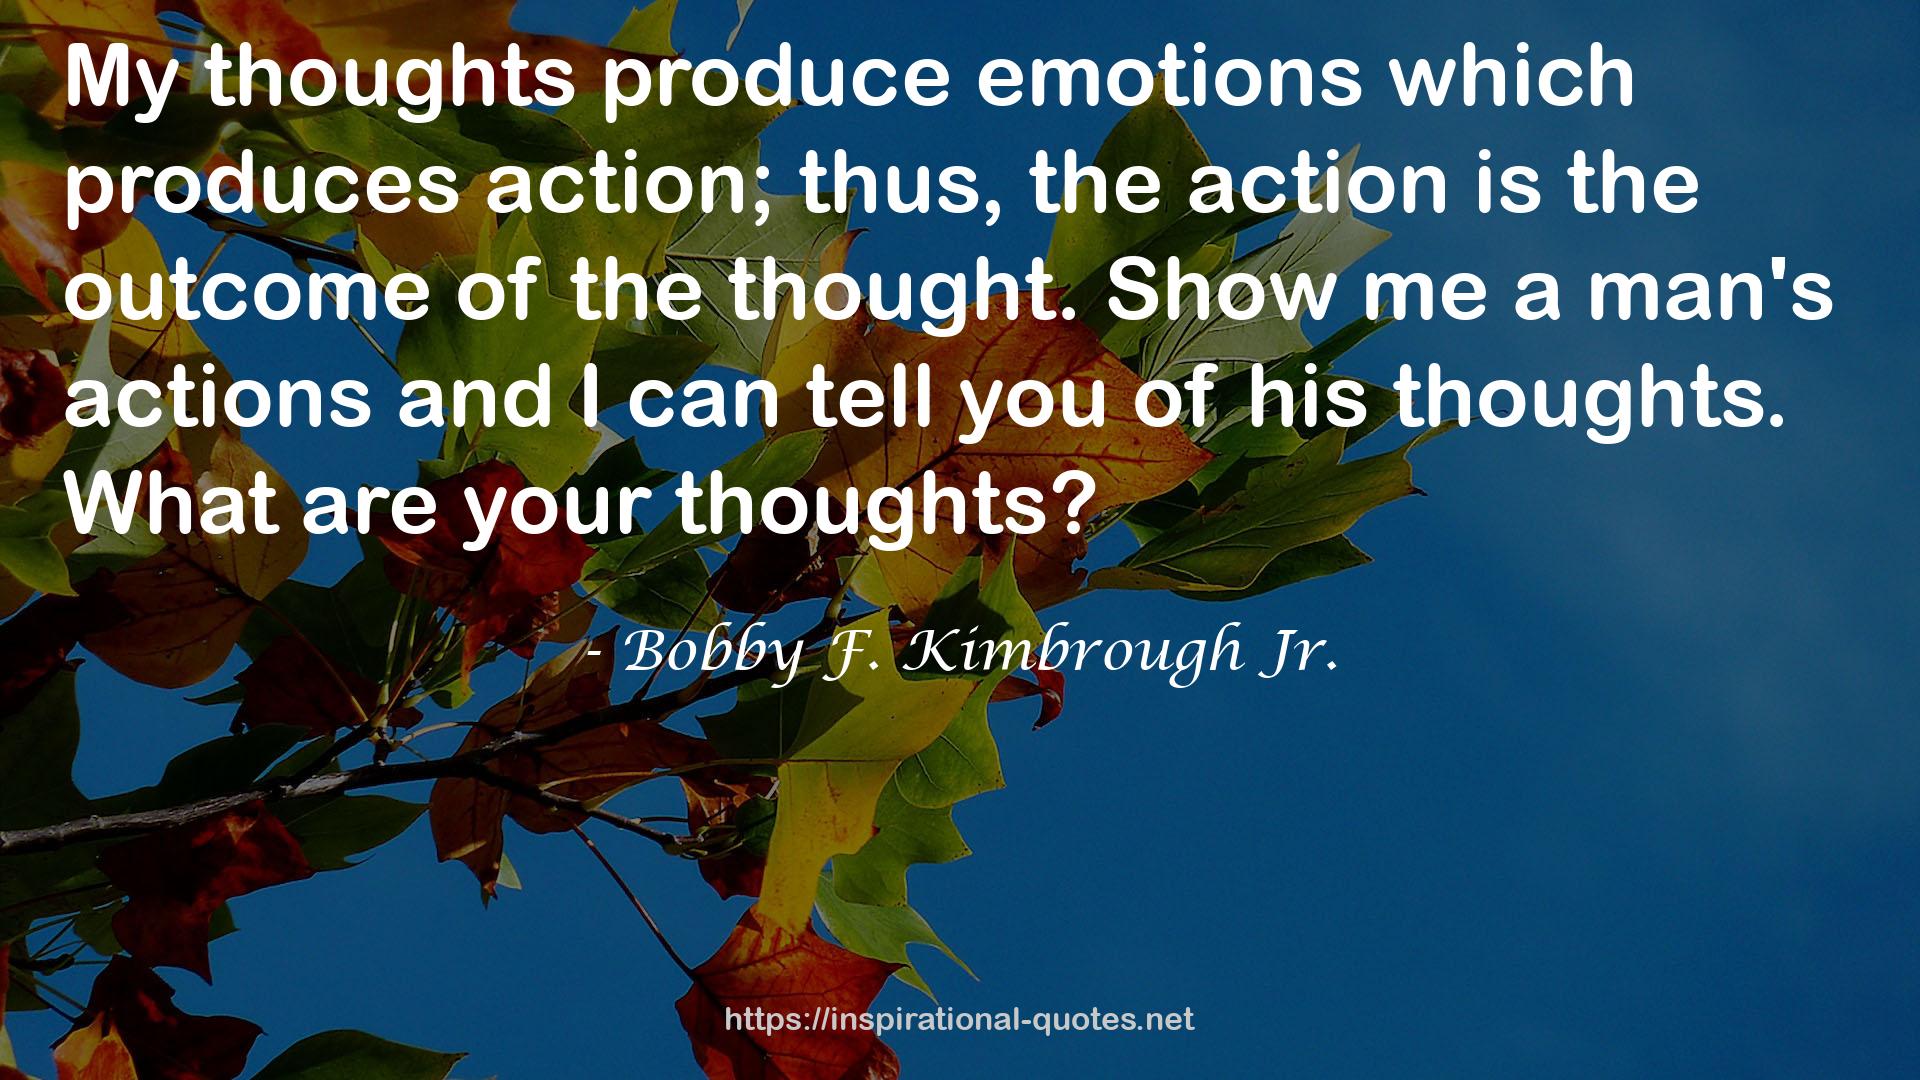 a man's actions  QUOTES